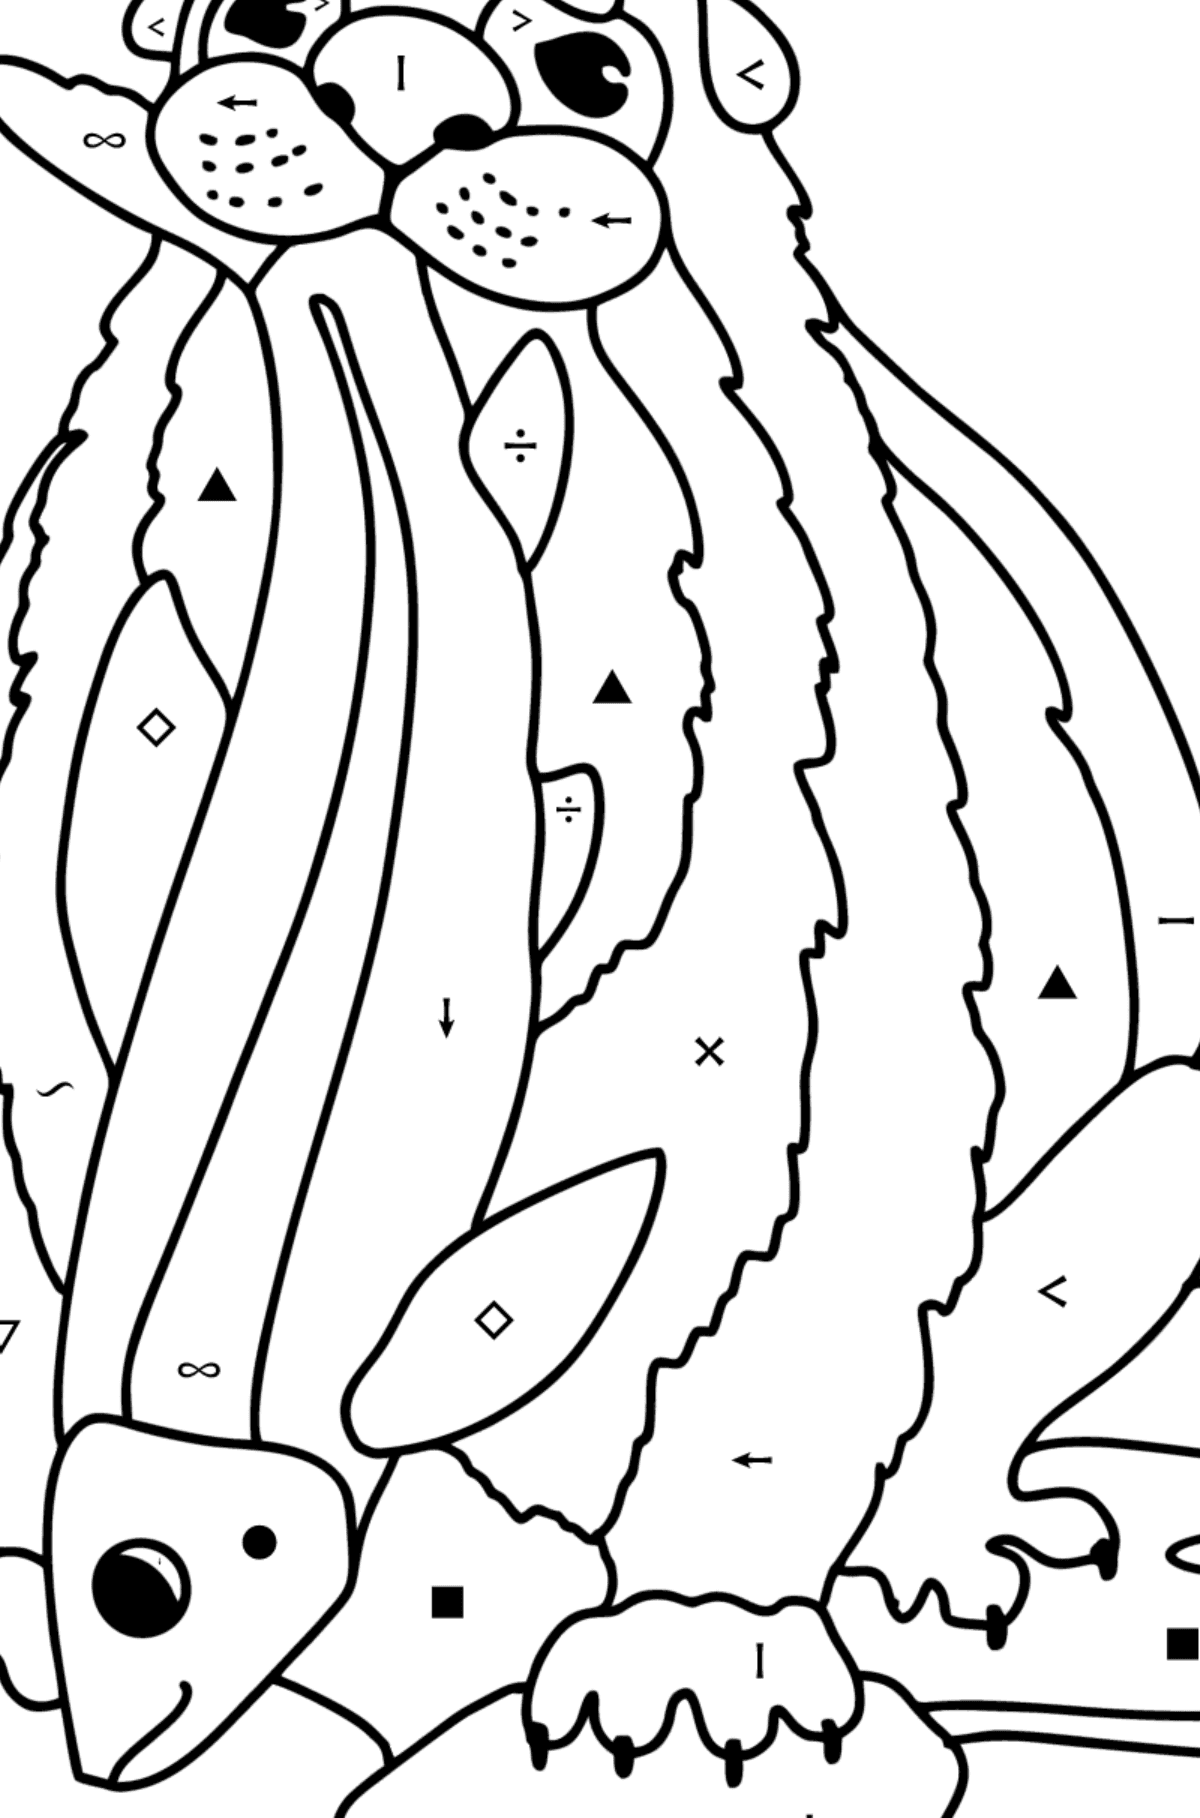 Sea Otter coloring page - Coloring by Symbols for Kids